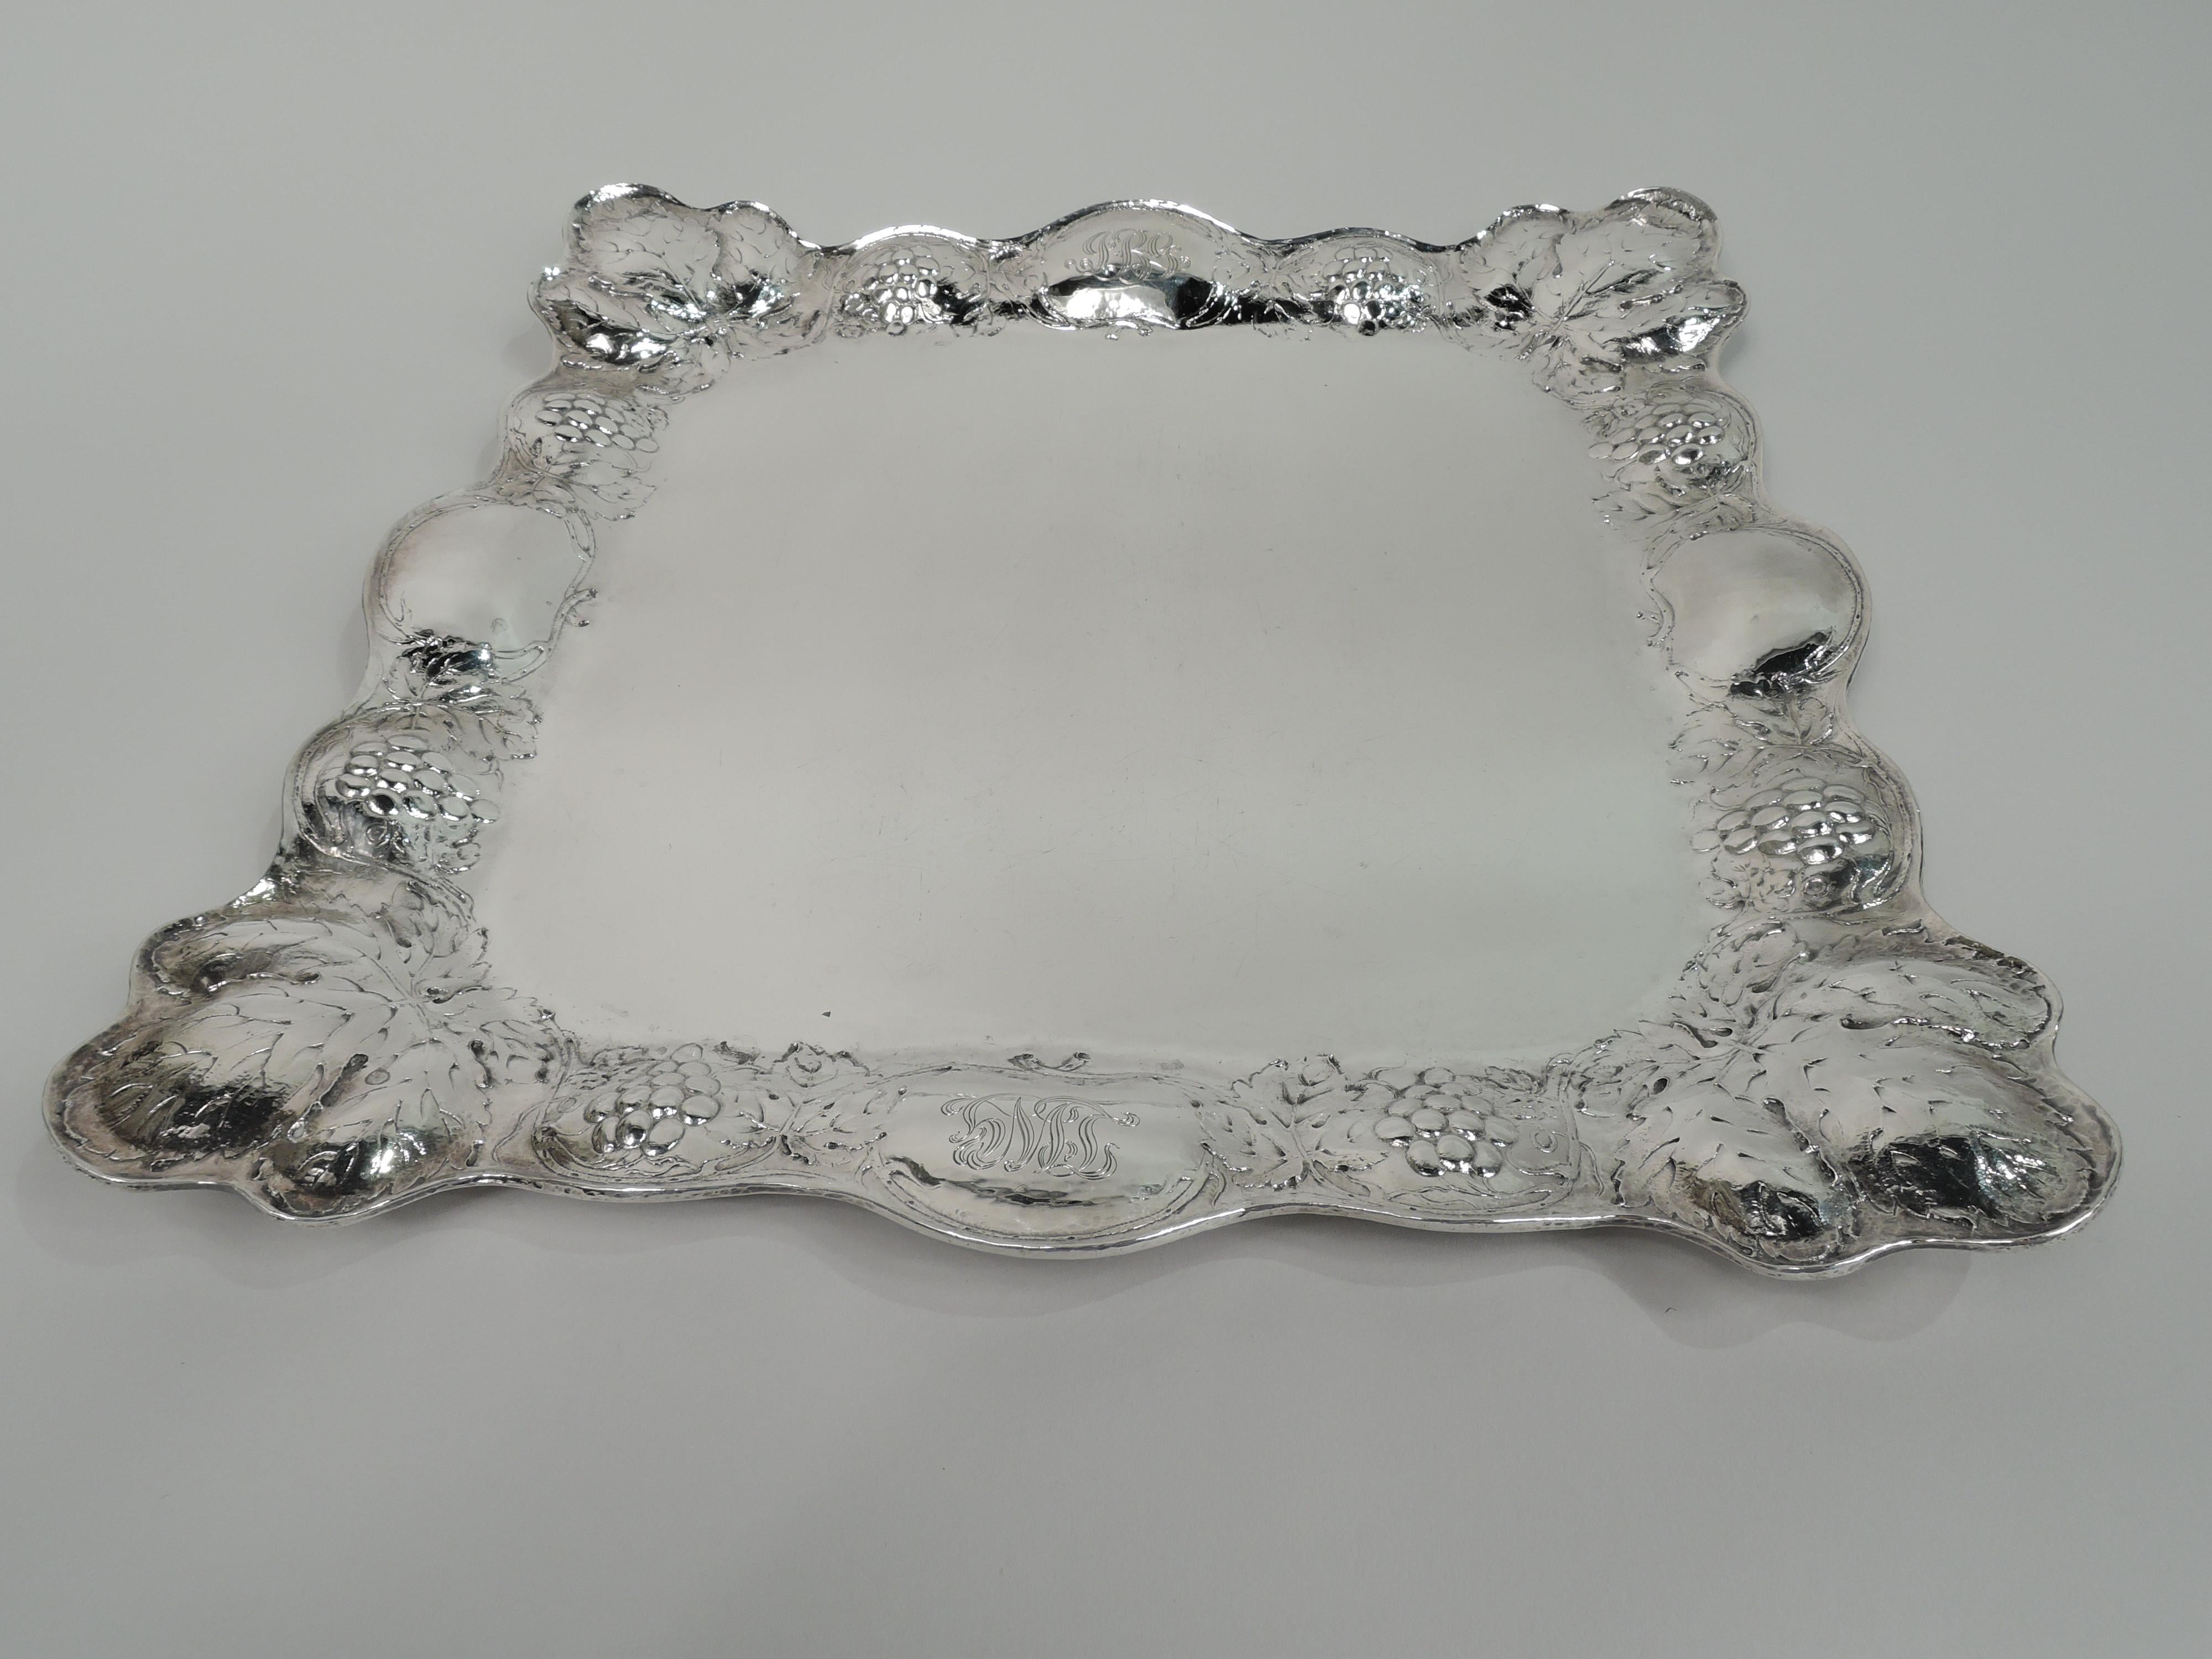 Art Nouveau Martelé silver tray. Made by Gorham in Providence on November 11, 1899. Square well with curved corners. Lobed and tapering sides with scalloped rim. Chased meandering fruiting grapevine and large leaves at corners on hand-hammered